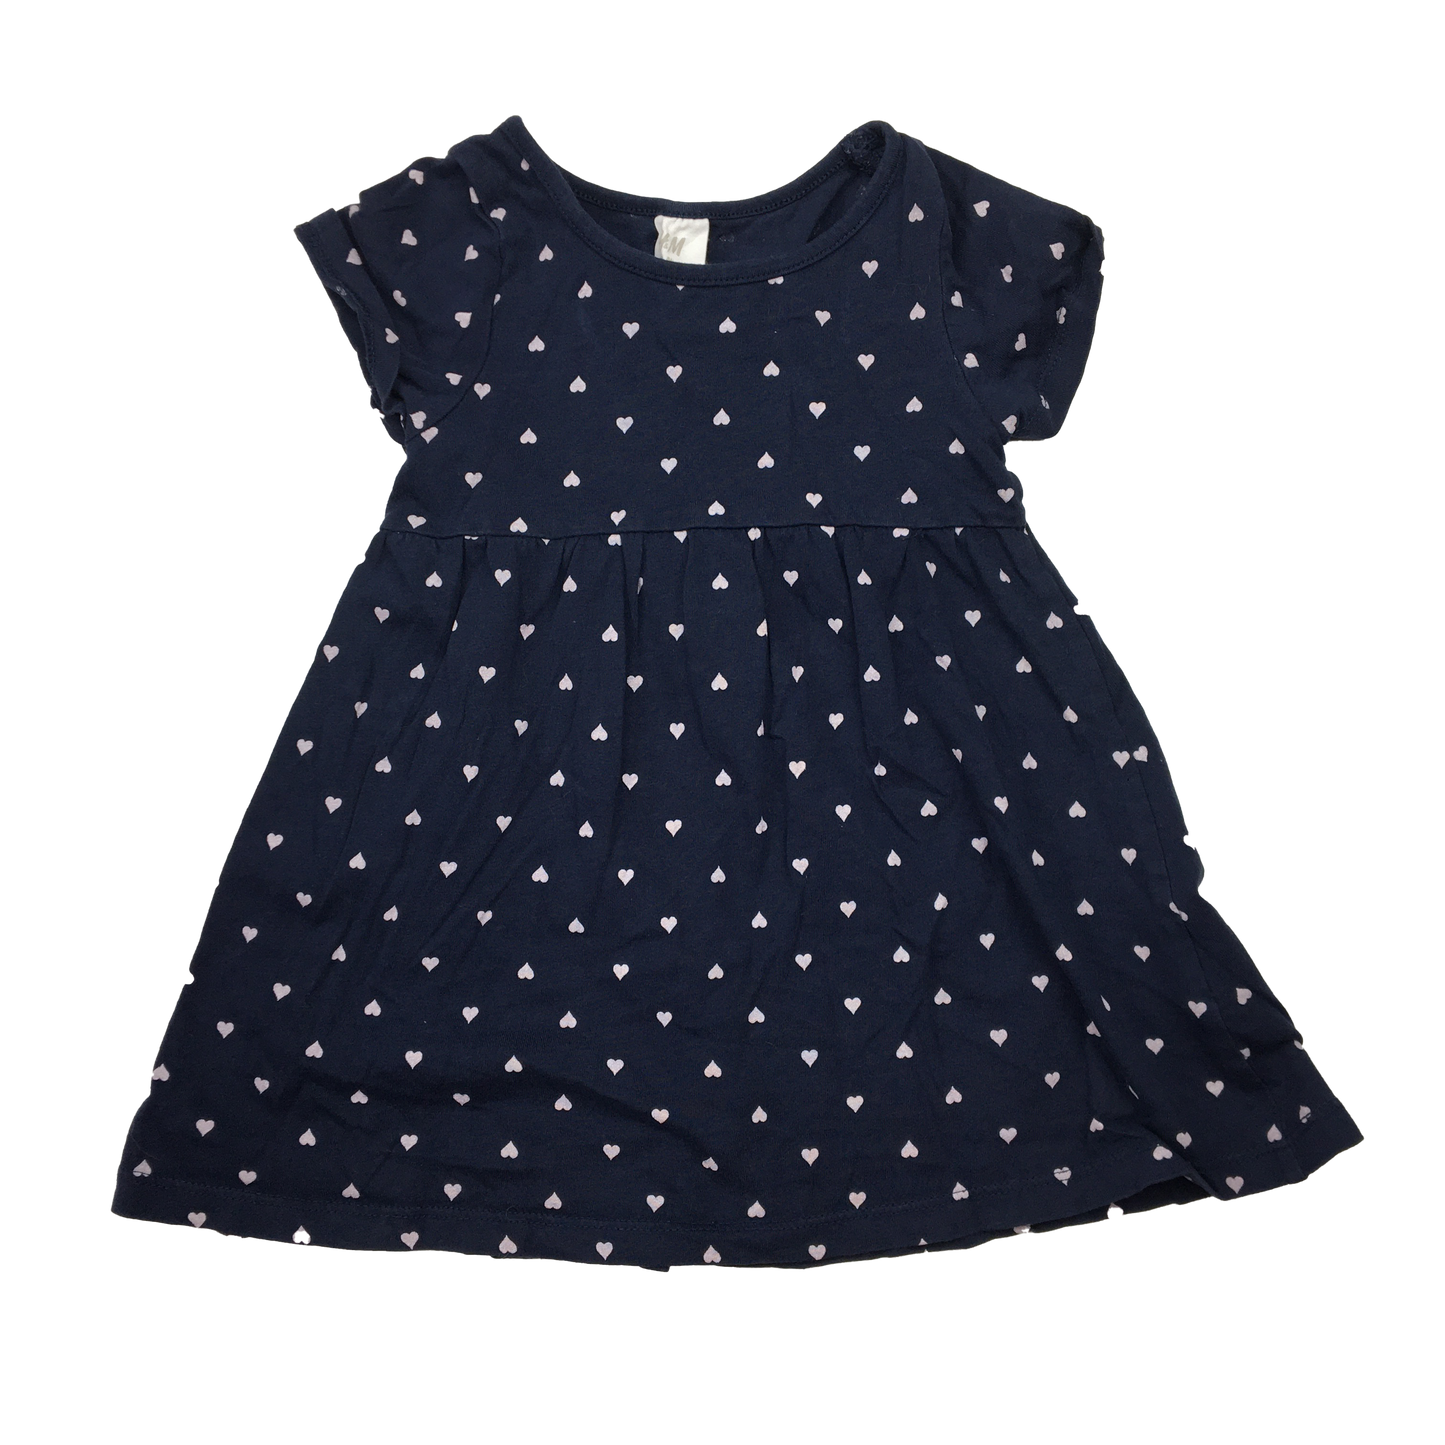 H&M Navy Dress with White Hearts 12-18M